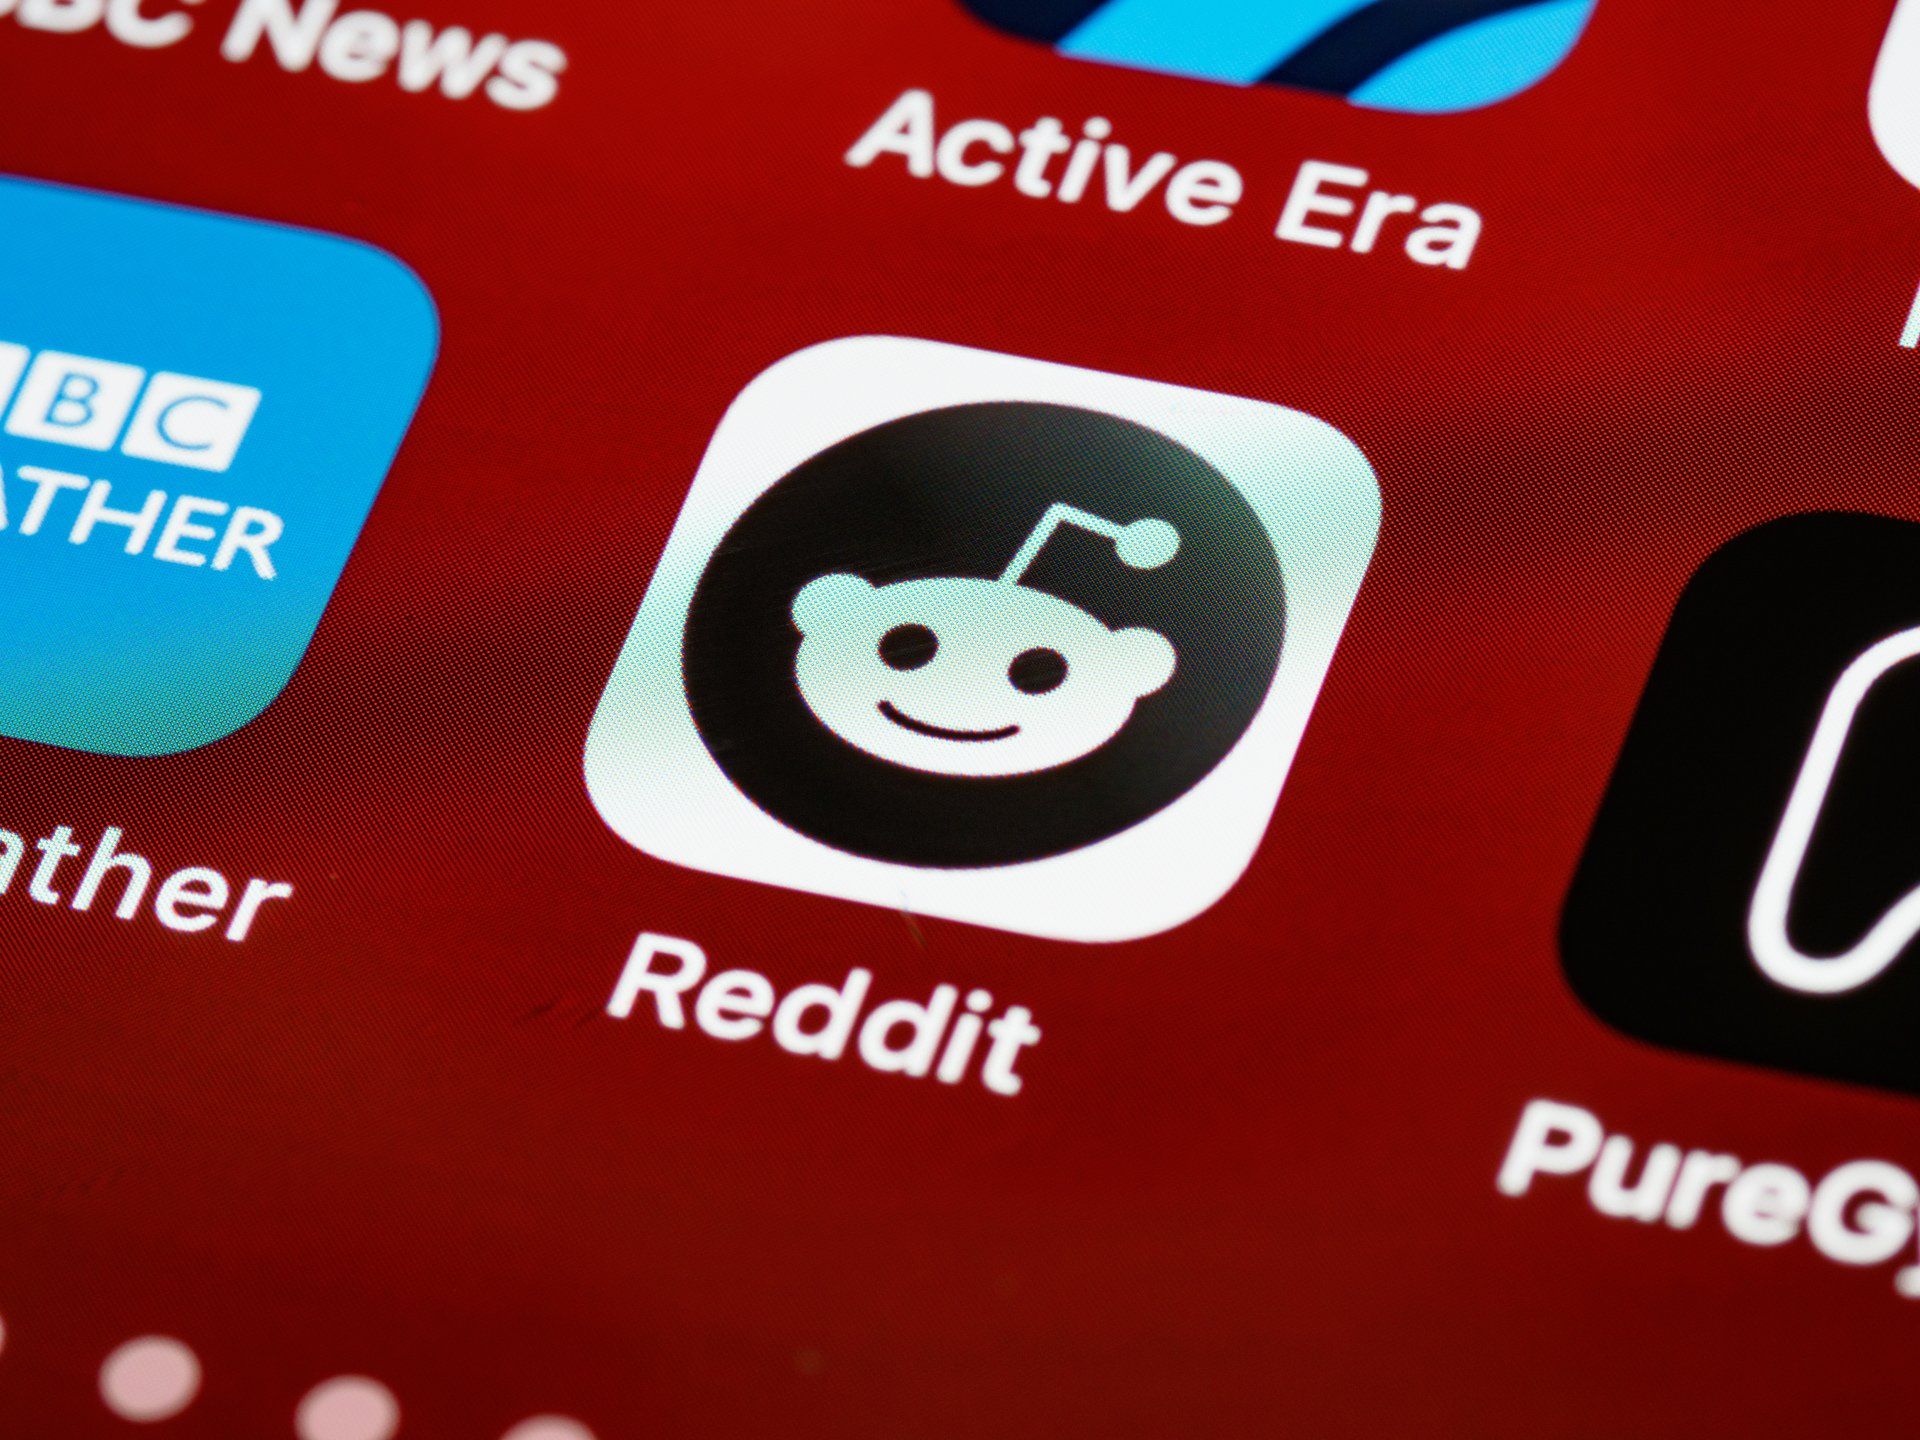 A close up of the reddit app on a phone screen